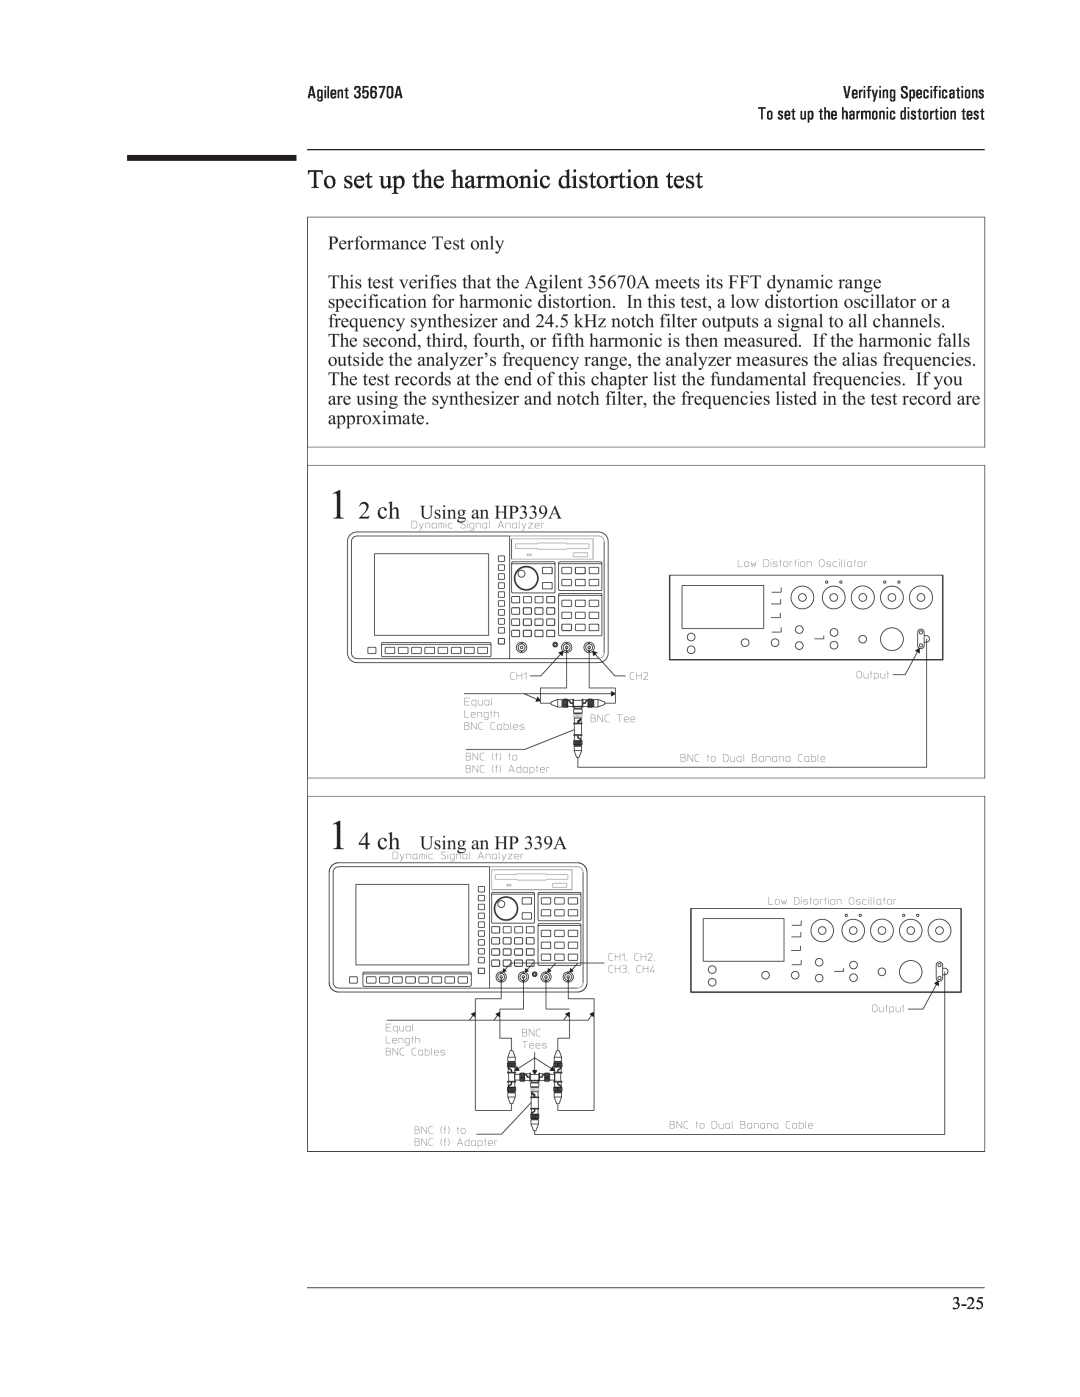 Agilent Technologies 35670-90066 manual To set up the harmonic distortion test, 1 2 ch, 1 4 ch 